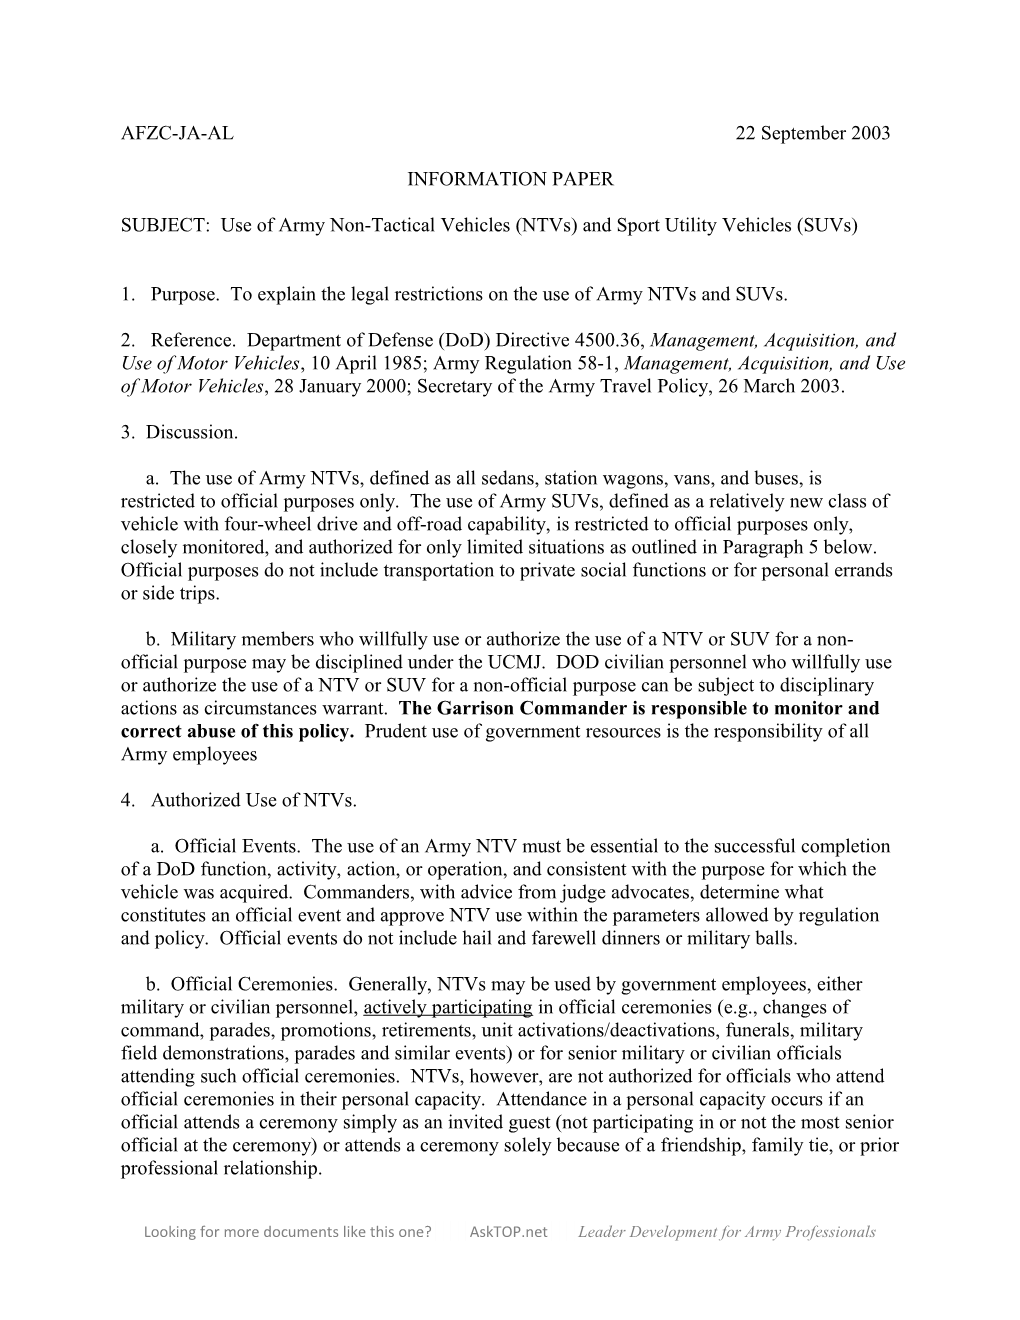 SUBJECT: Use of Army Non-Tactical Vehicles (Ntvs) and Sport Utility Vehicles (Suvs)